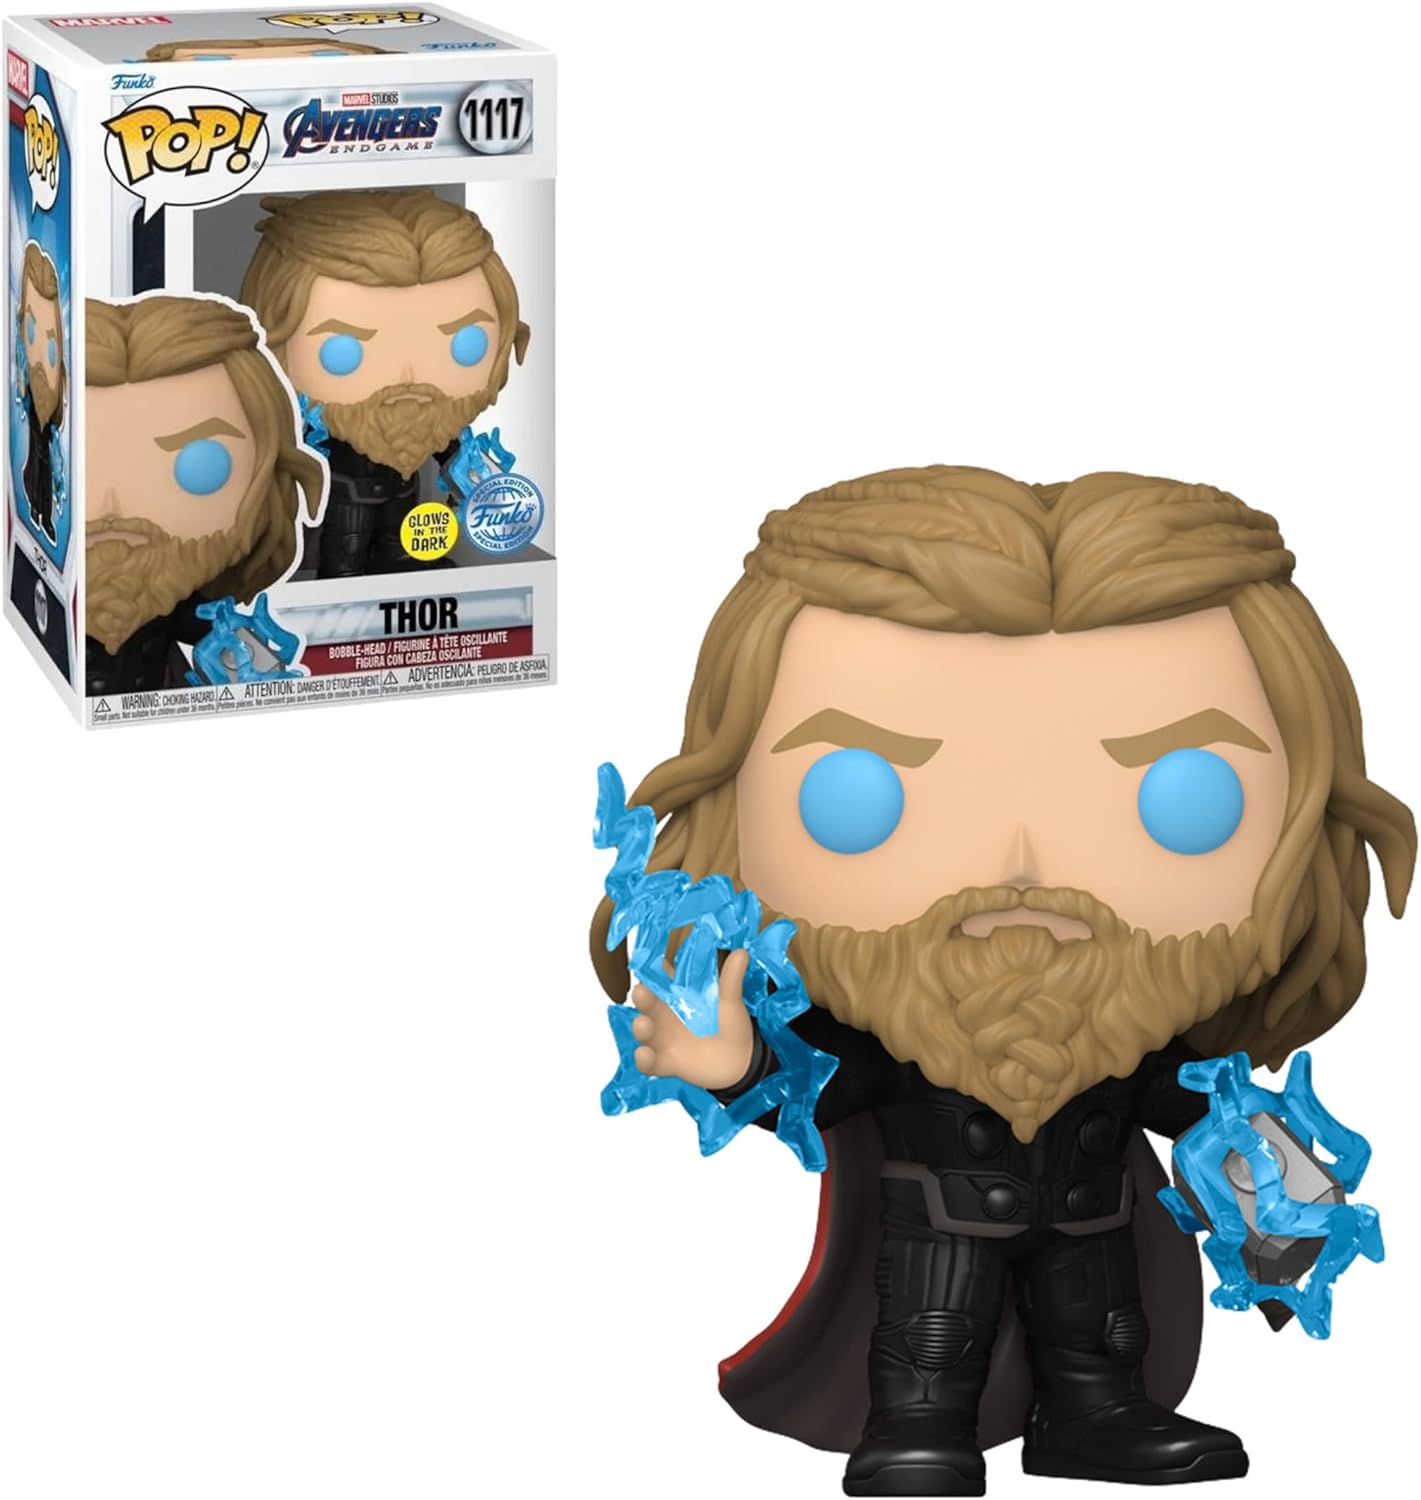 Thor glows in the dark special edition #1117